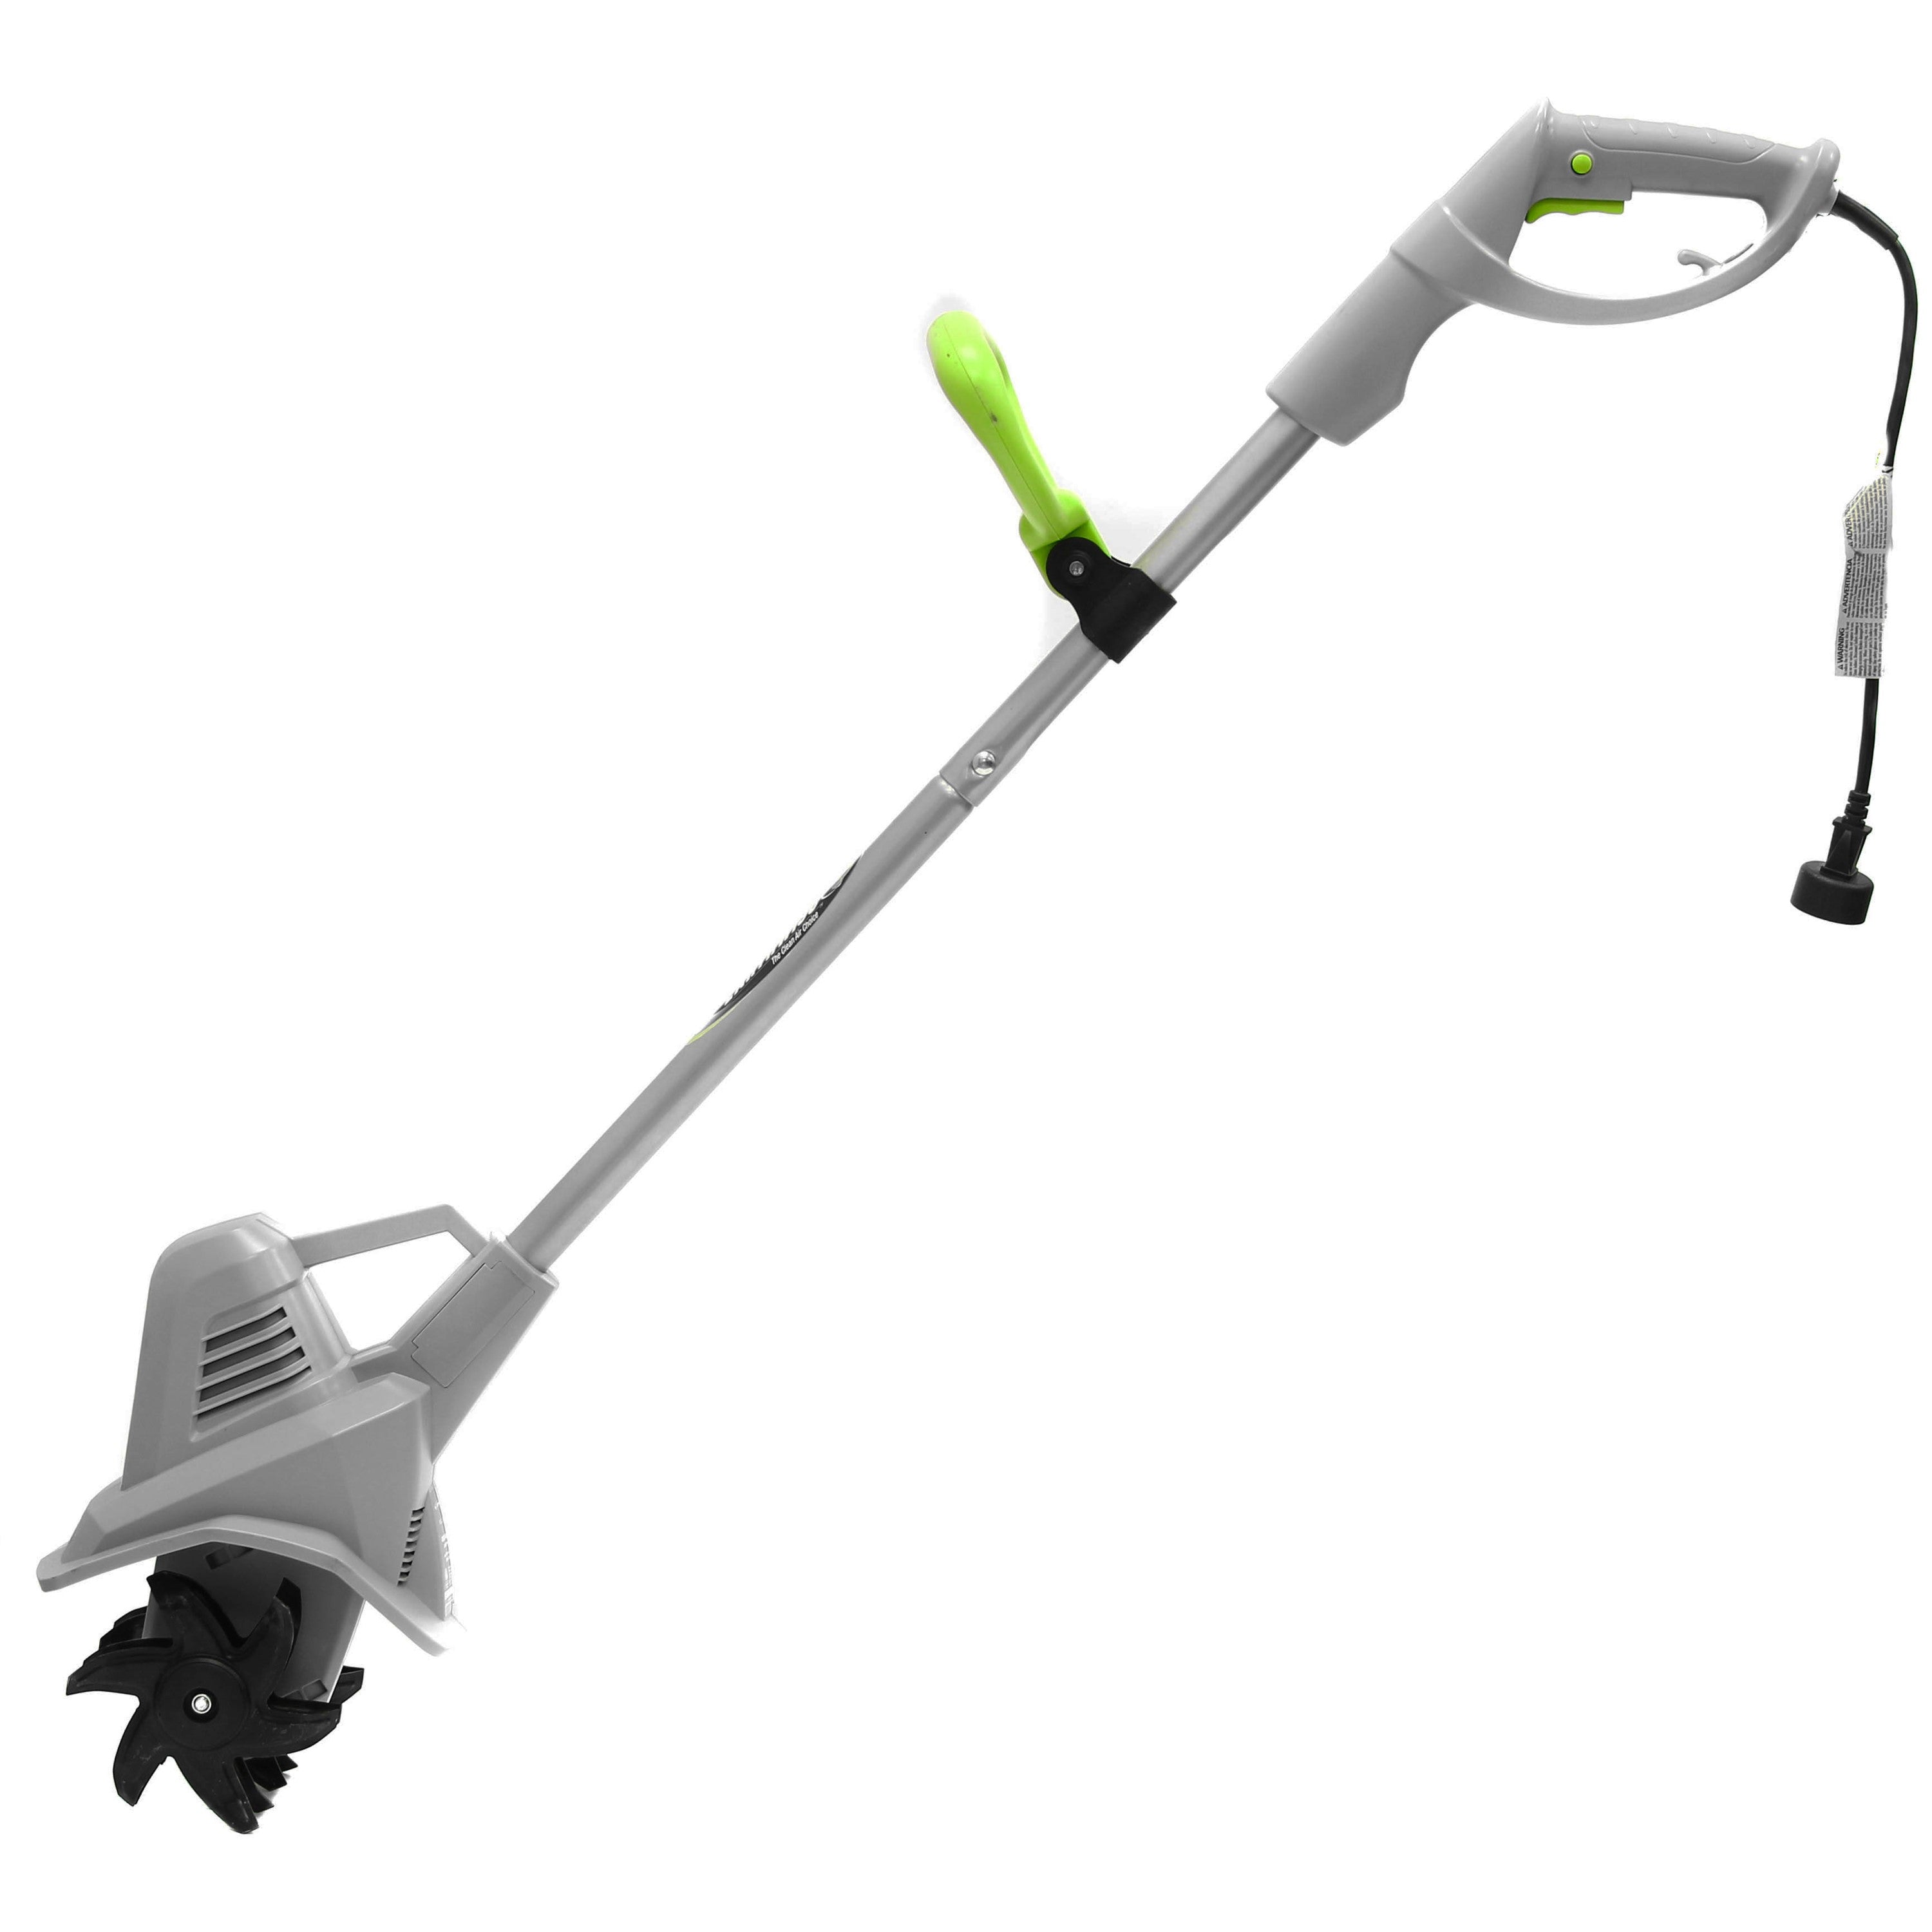 Earthwise Power Tools by ALM 7.5" 2.5-Amp 120V Corded Tiller/Cultivator